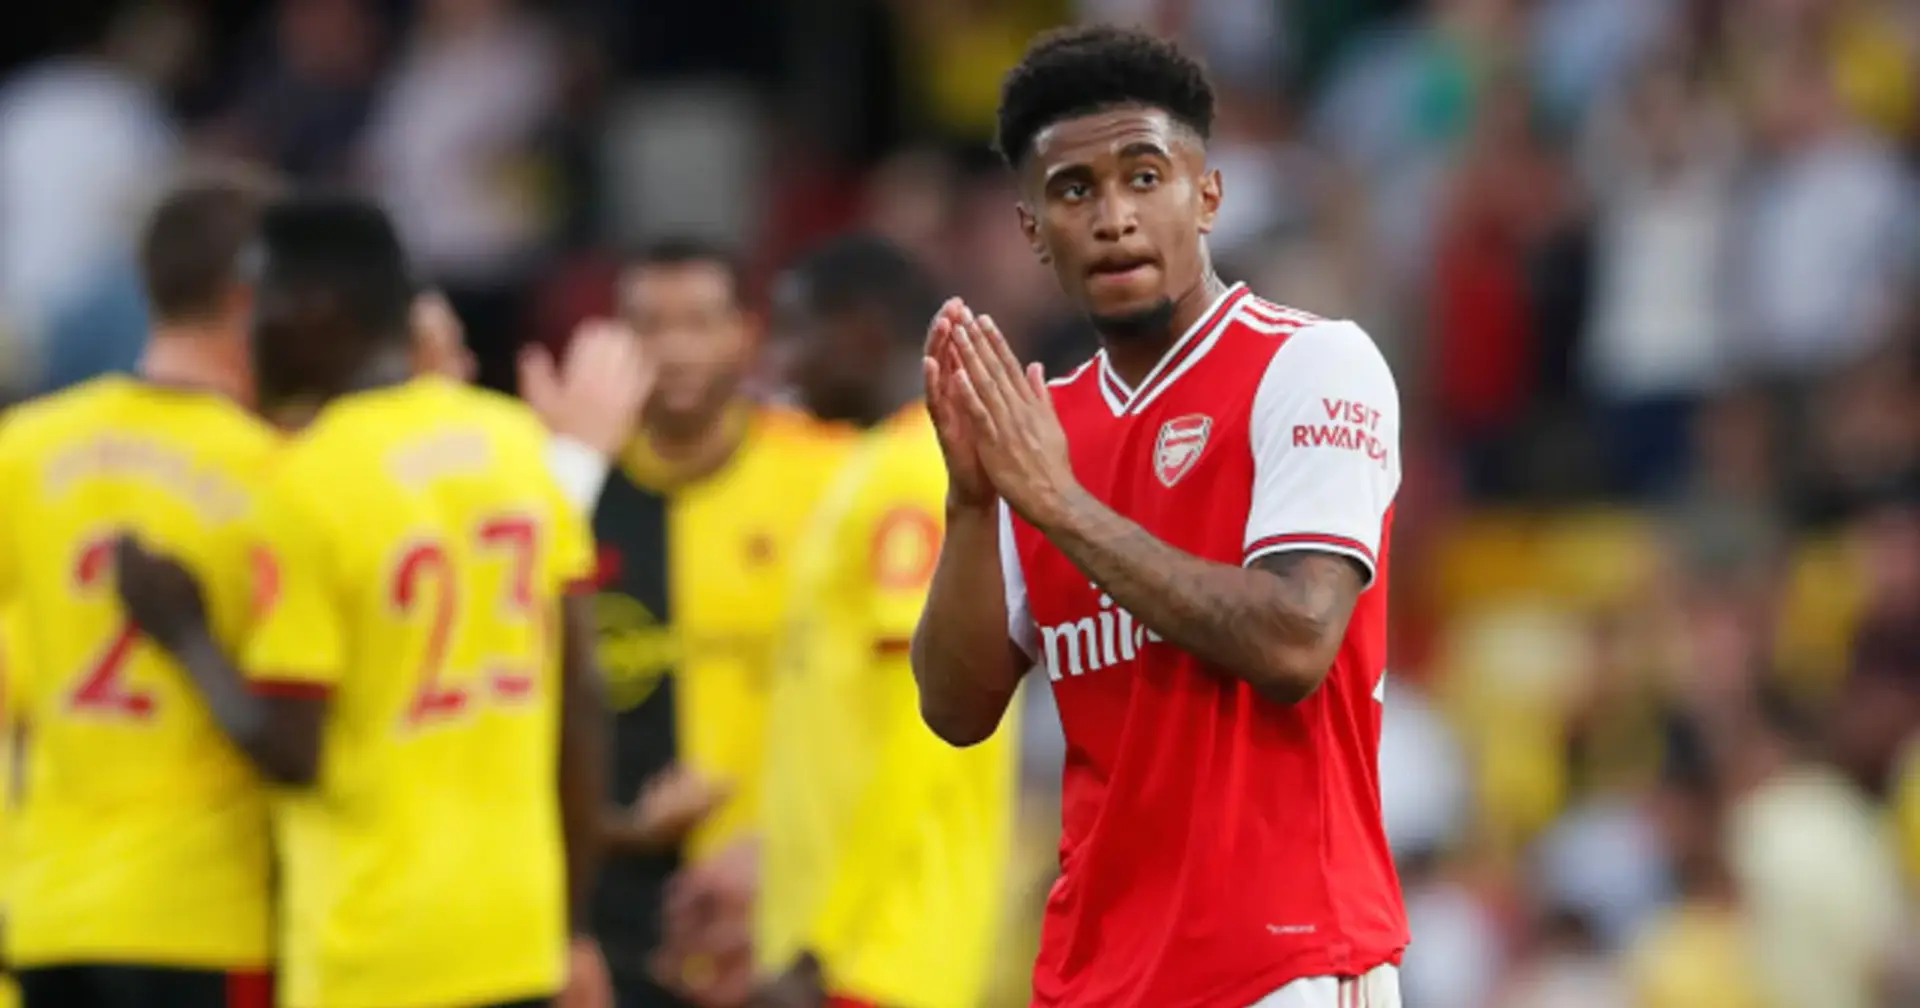 Arsenal ready to listen to offers for Reiss Nelson this summer (reliability: 4 stars)